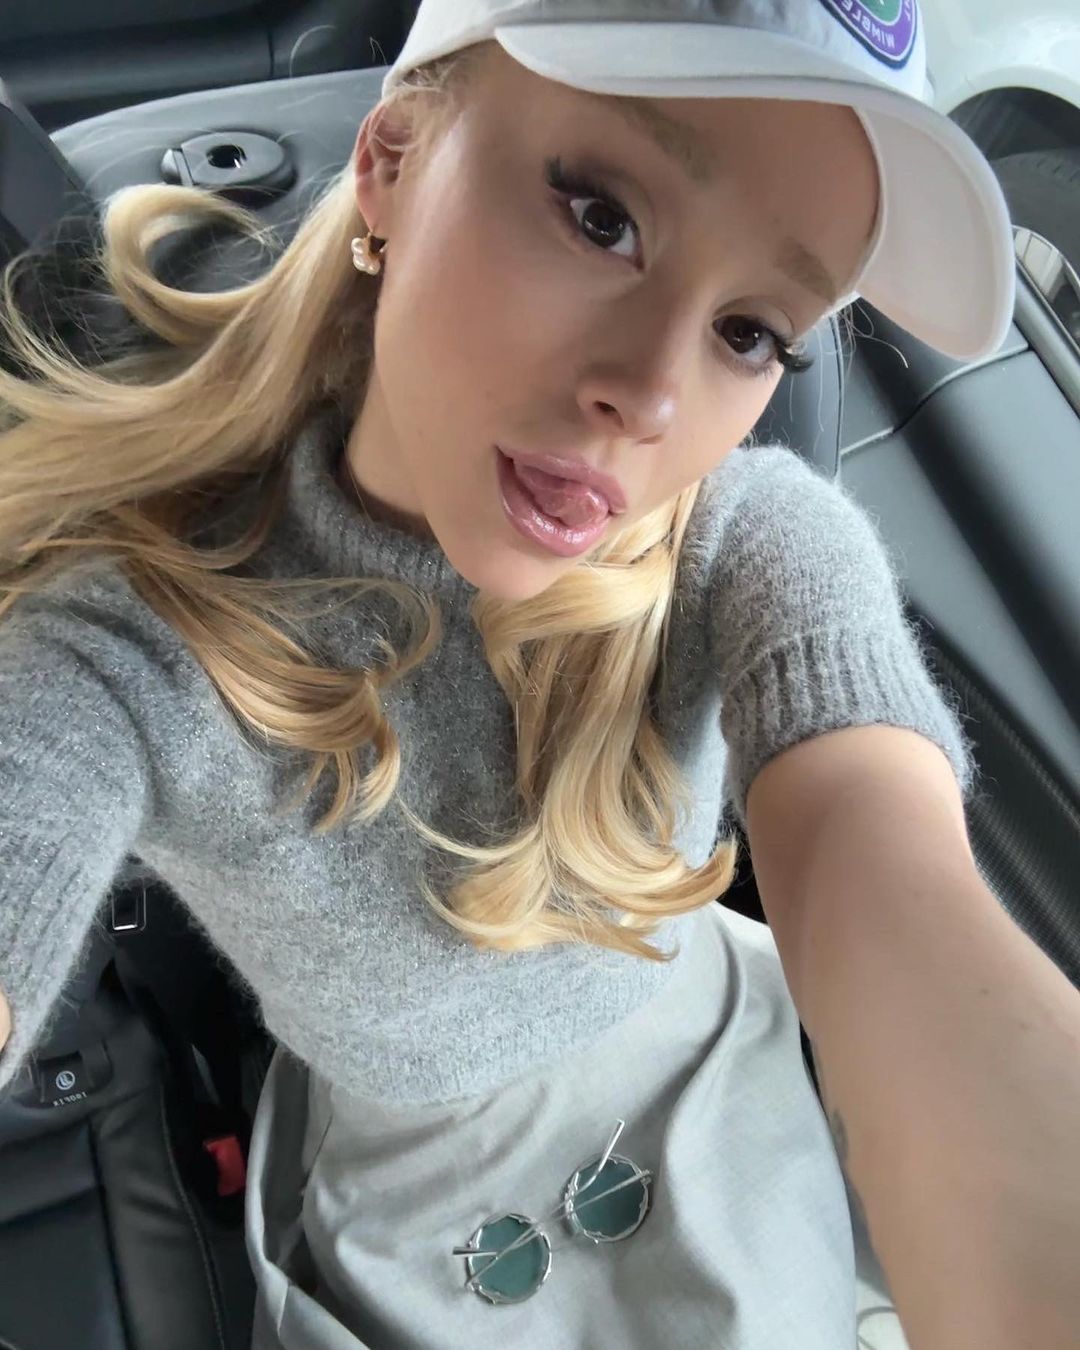 Ariana Grande watched the tennis game. (Photo: Instagram)